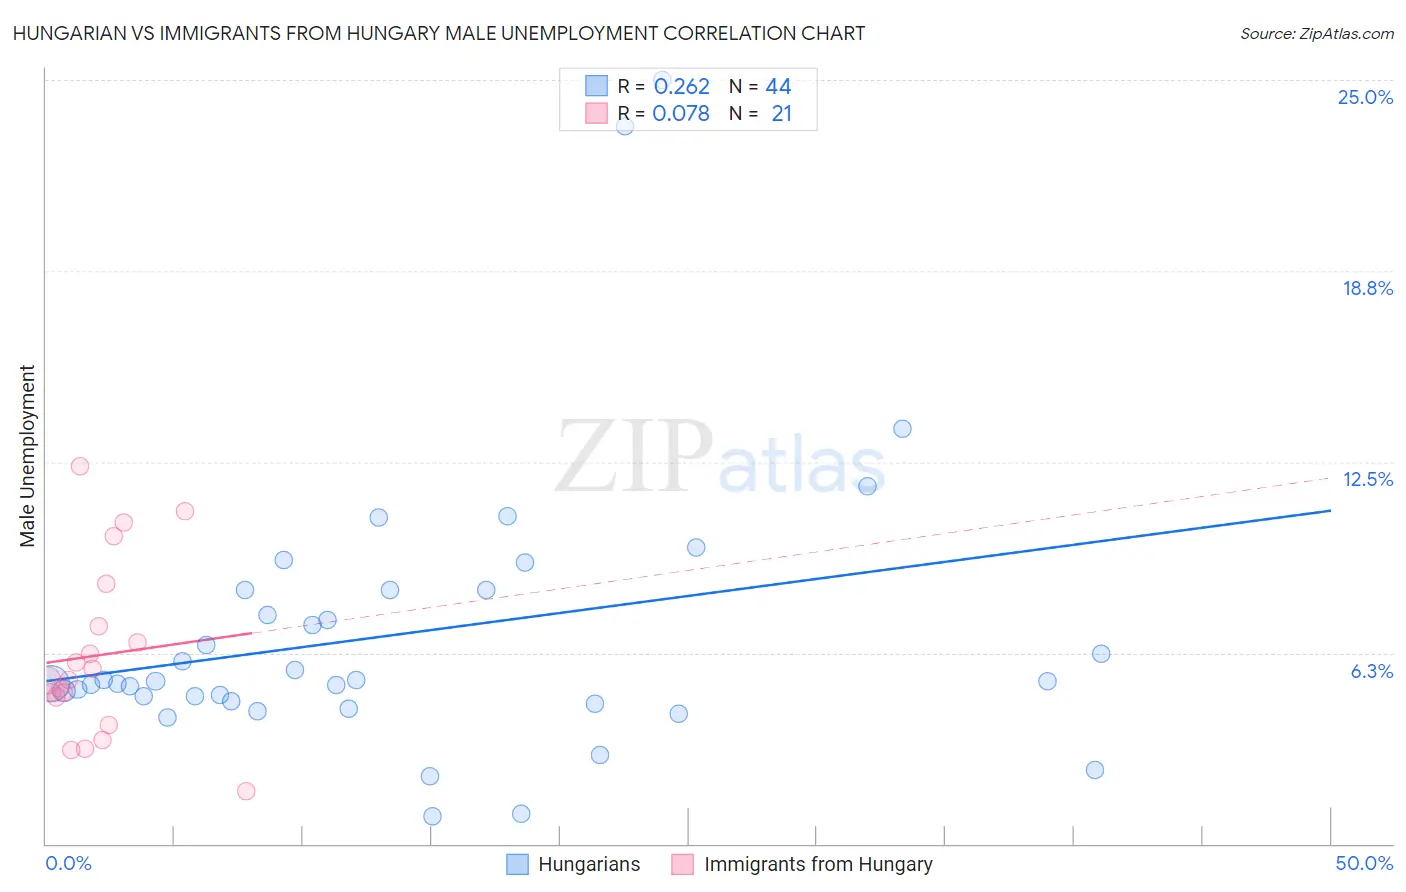 Hungarian vs Immigrants from Hungary Male Unemployment